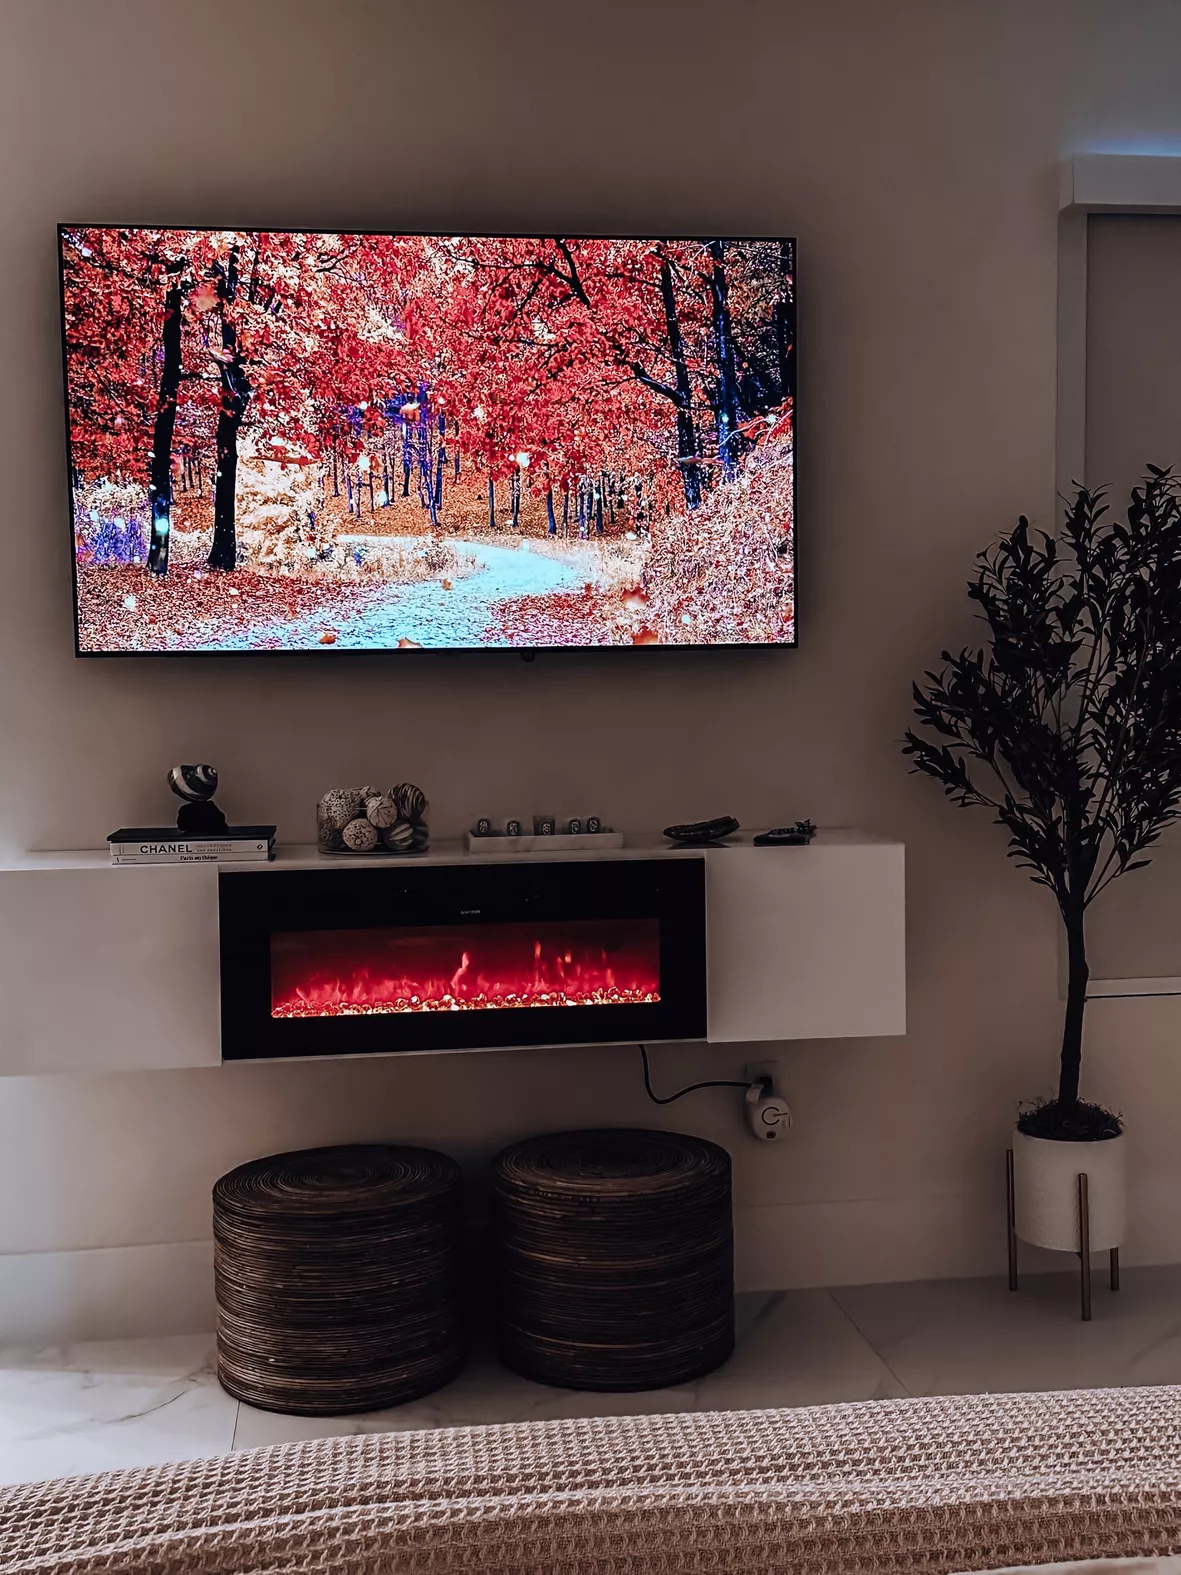  AMERLIFE Floating Fireplace TV Stand, Wall Mounted Mirrored Entertainment  Center with 40 Electric Fireplace, Modern LED Lights Media Console for TVs  Up to 90, All White : Home & Kitchen